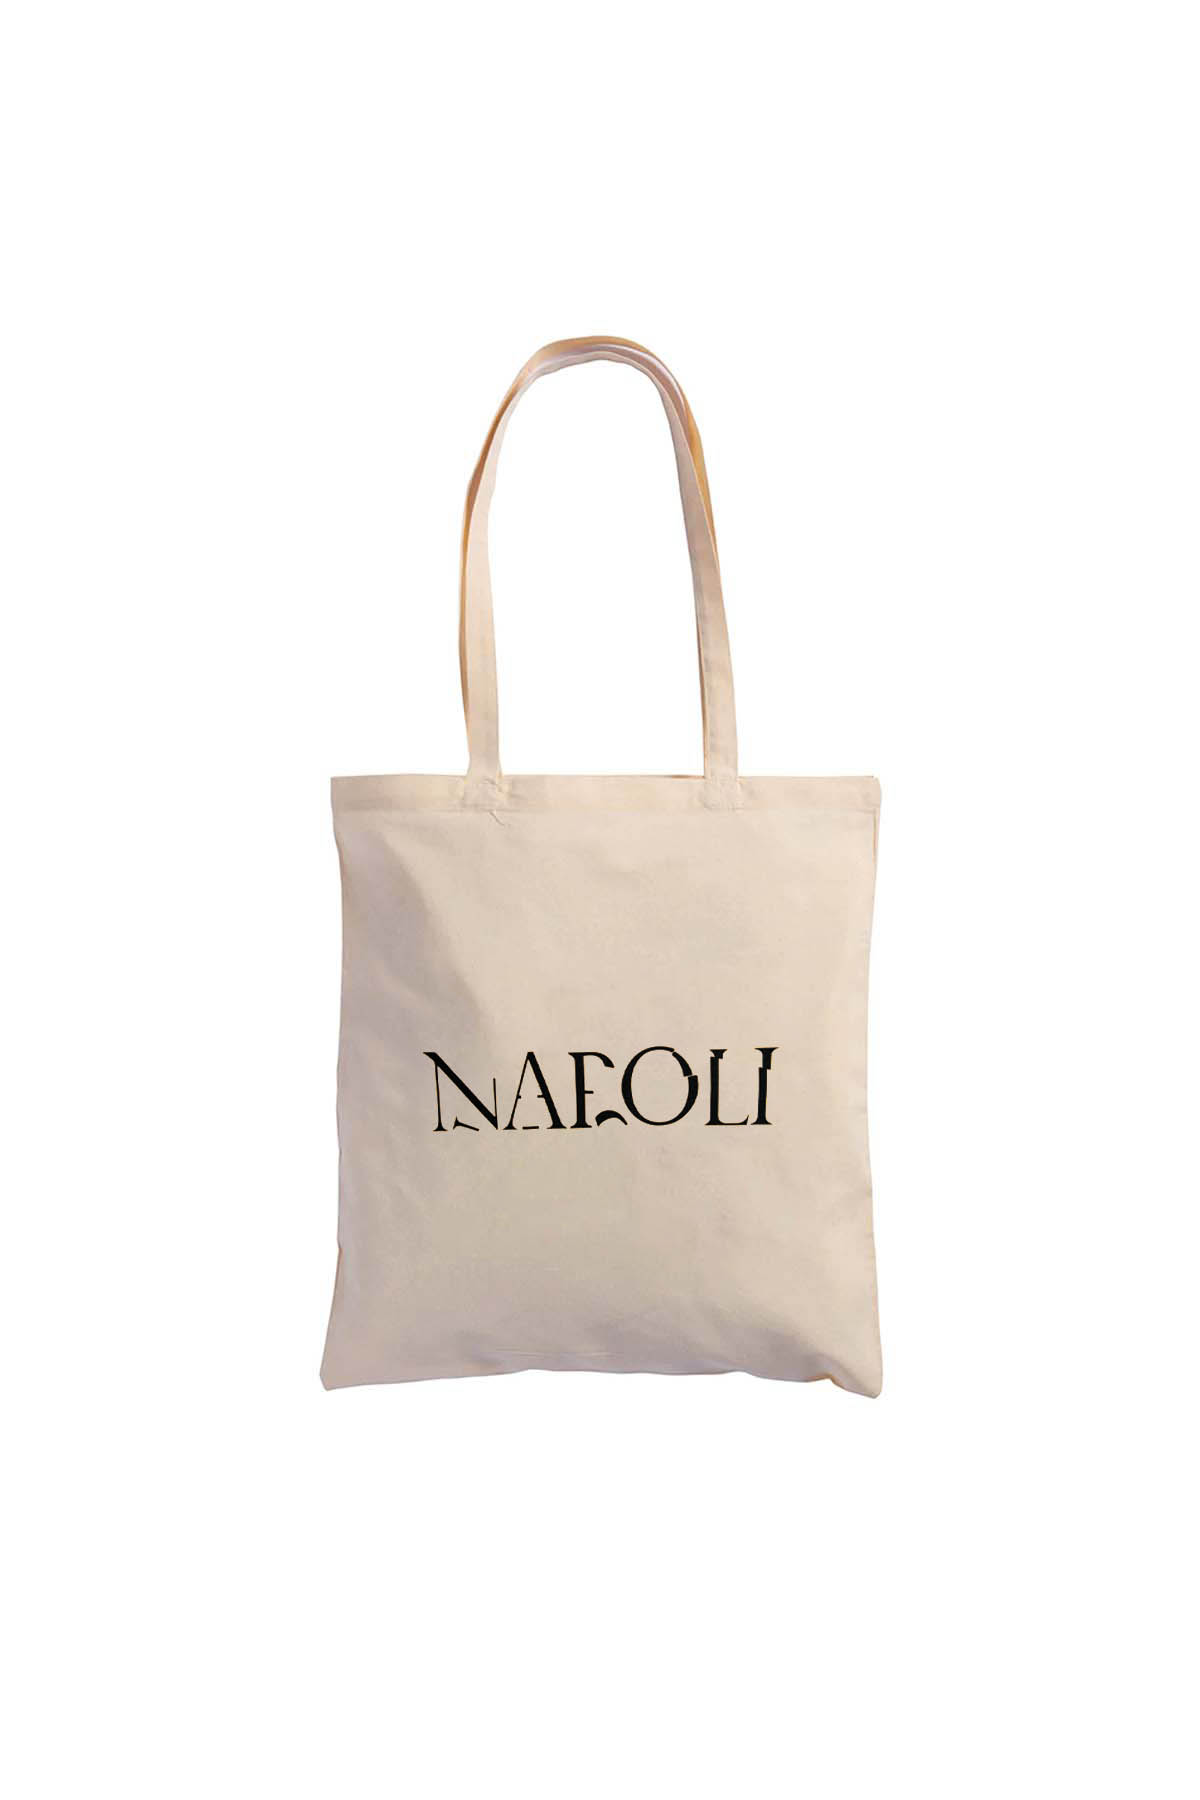 NAPOLI by John McConnell Cotton Bag